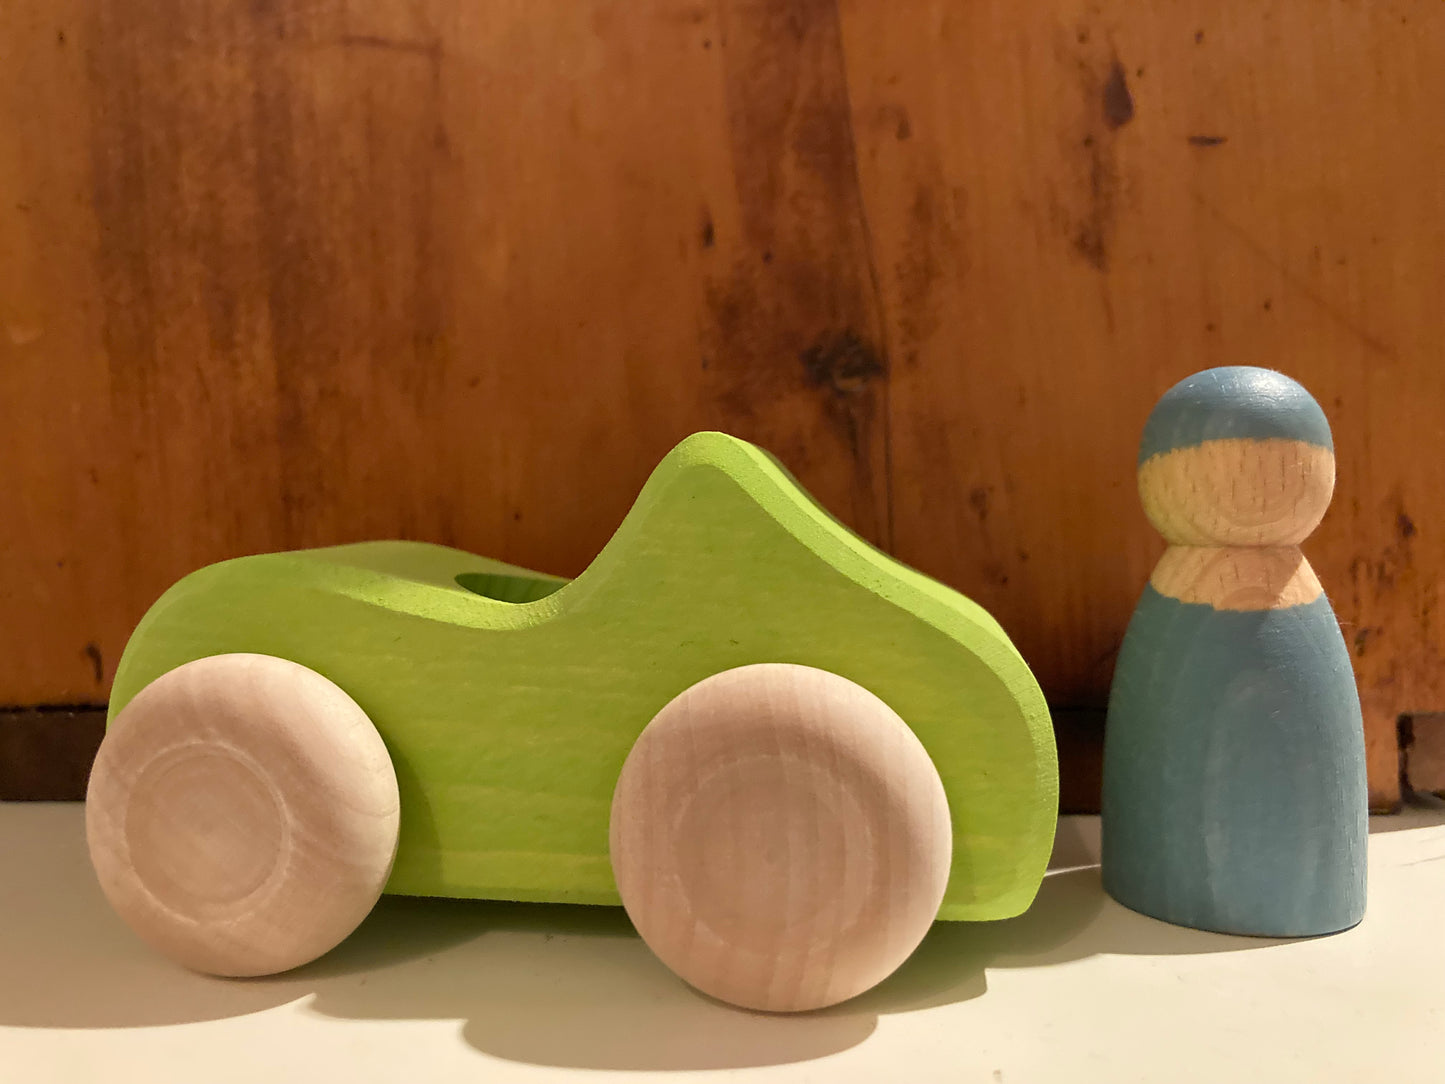 Wooden Toy Car - GREEN CONVERTIBLE with driver